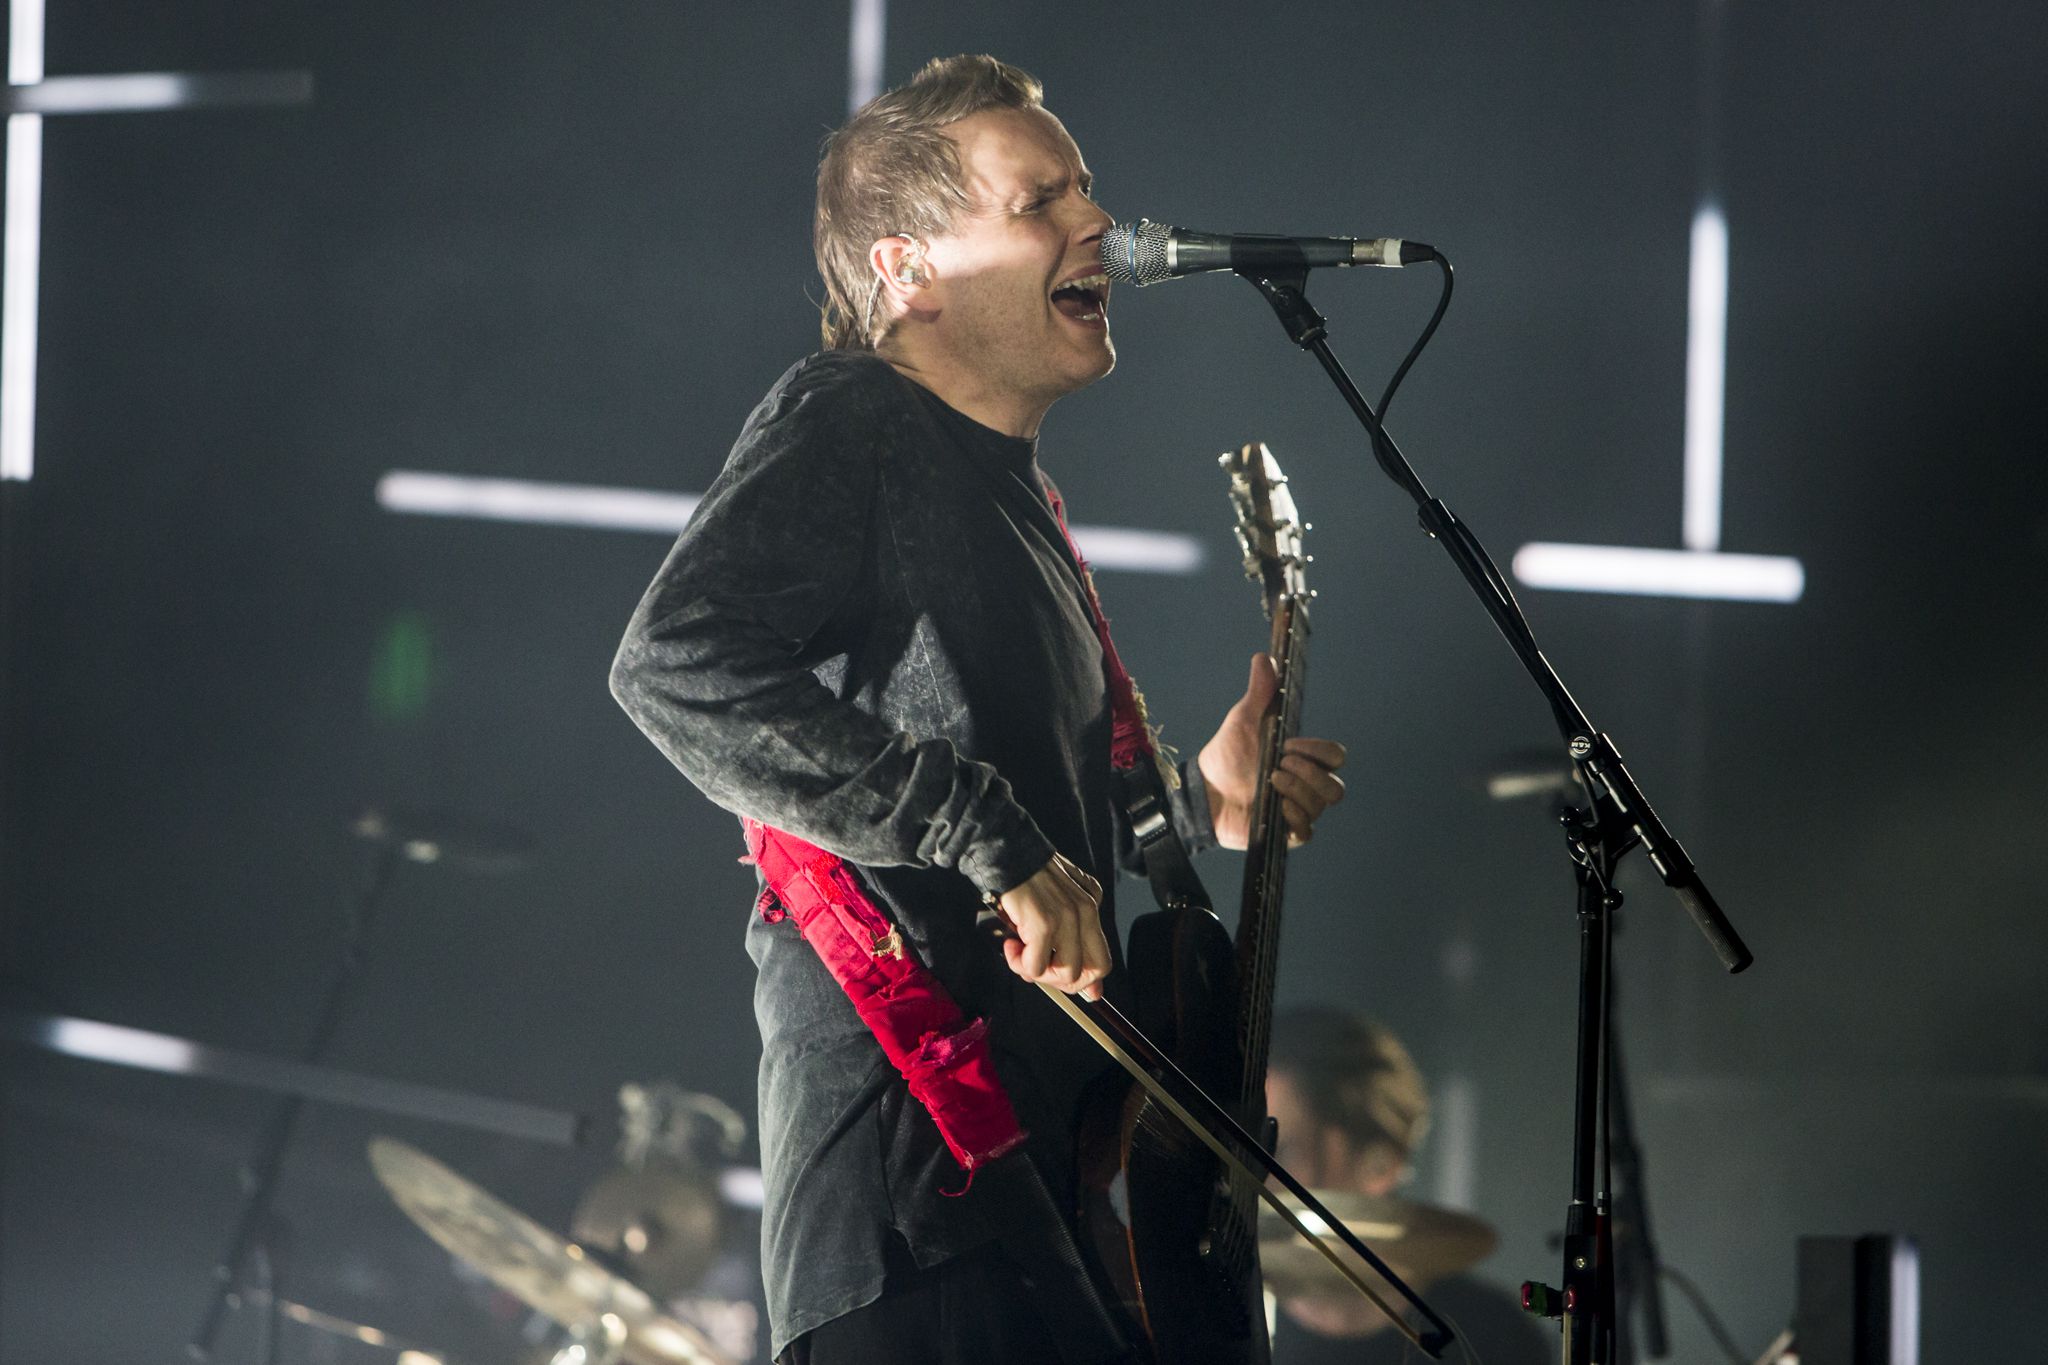 sigur ros 16 Live Review: Sigur Rós at the Fox Theater in Pomona (4/10)